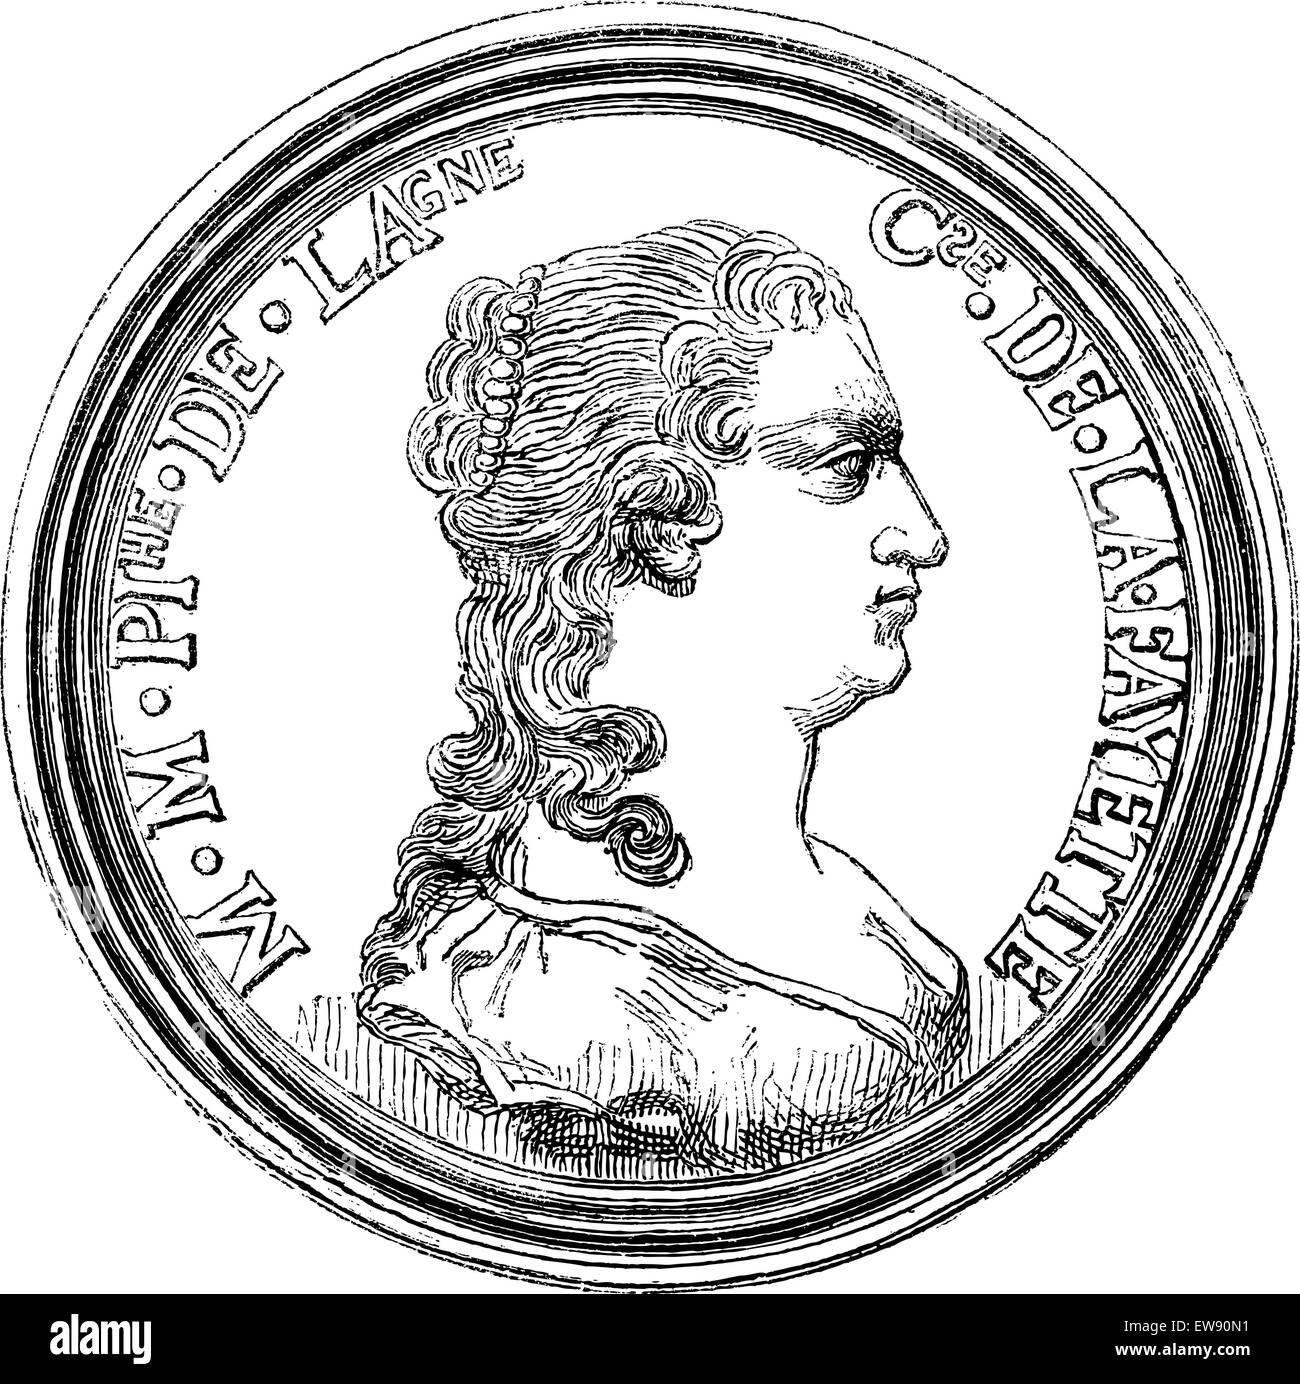 Cabinet of medals from the National Library. - Medal of the Comtesse de la Fayette, vintage engraved illustration. Magasin Pitto Stock Vector